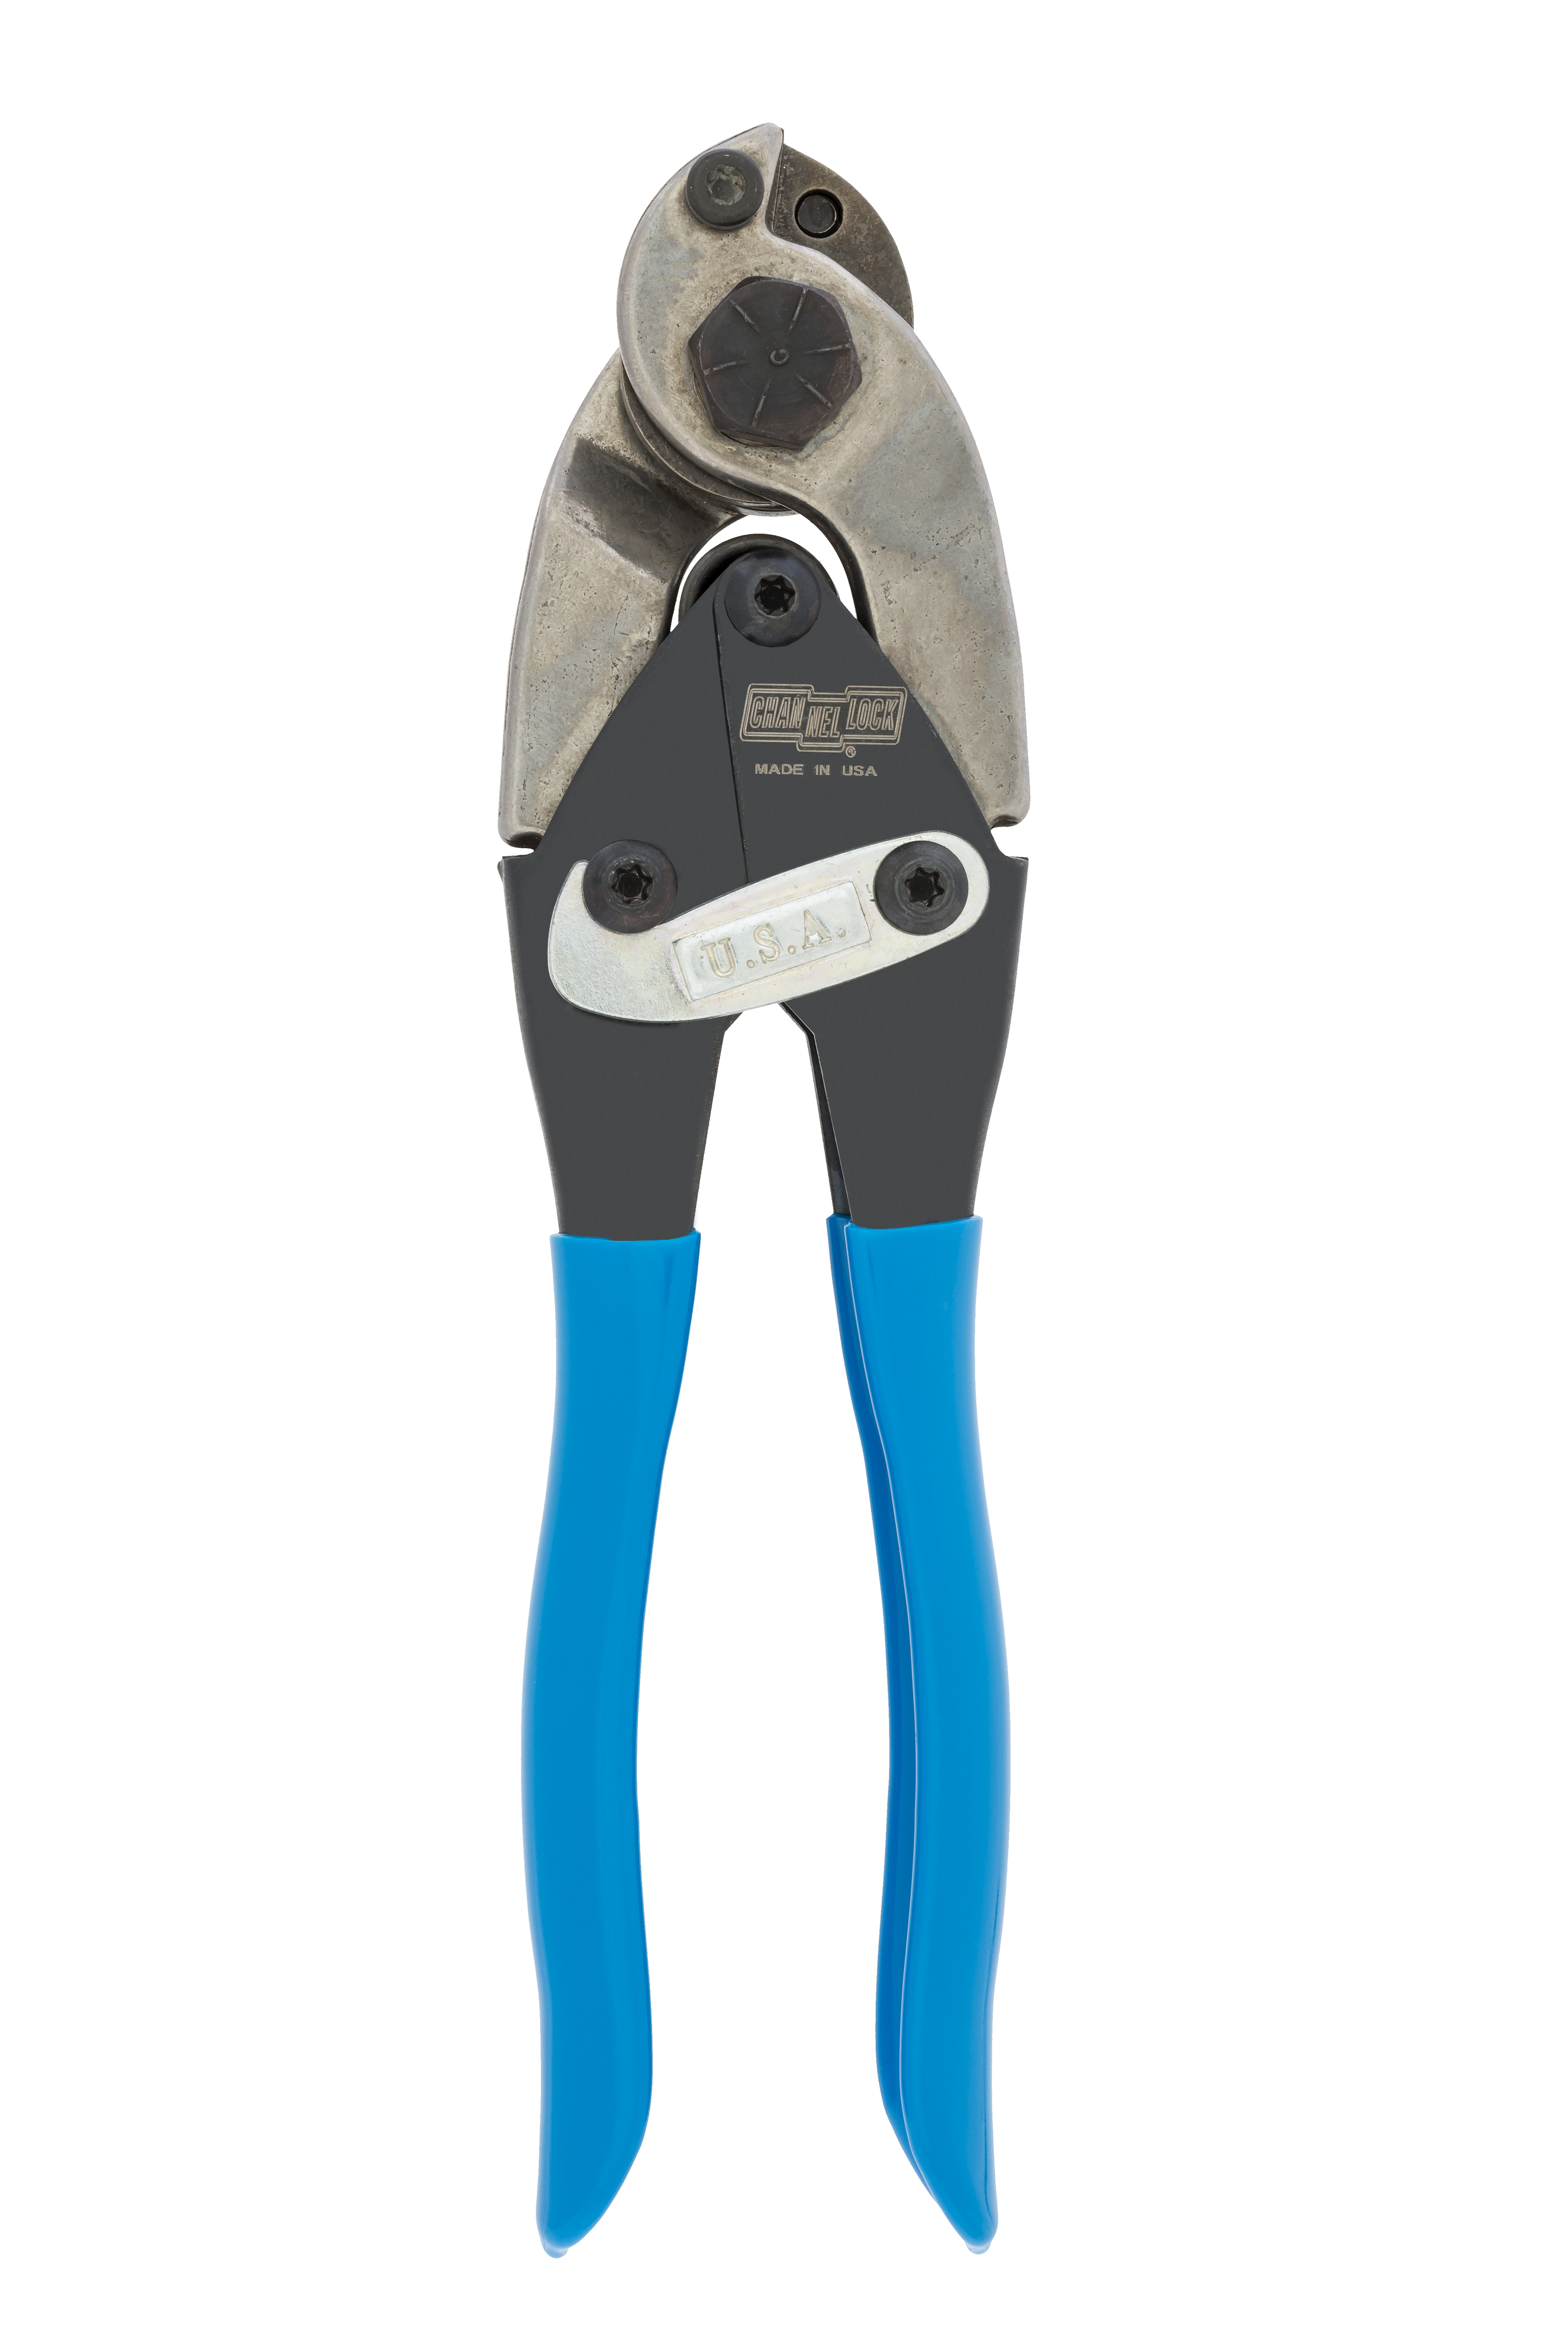 9" Compound Joint Cable/Wire Cutter